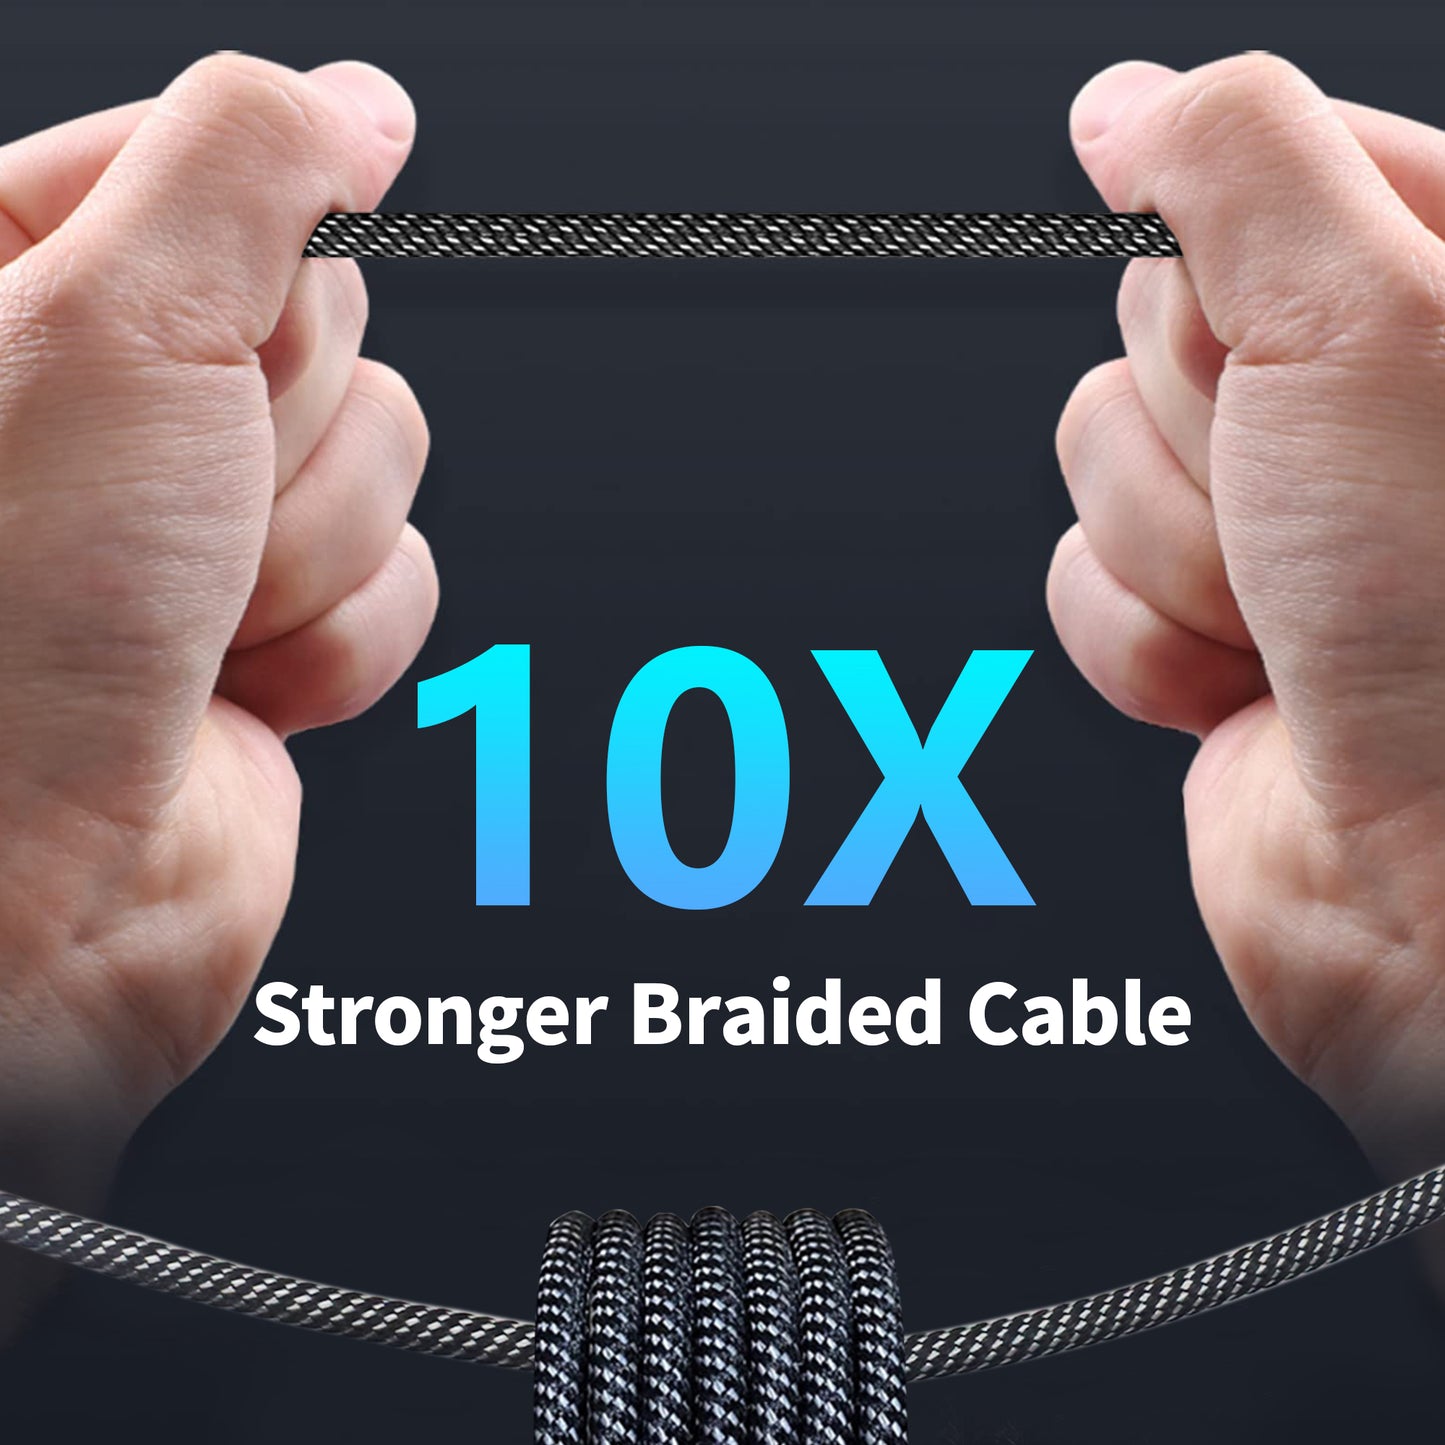 Verilux Type C Cable Fast Charing 100W PD 5A 6.6FT, USB C to USB C Cable Zinc Alloy Nylon Braided Type Data Cable for MacBook Pro/Air, iPad Pro, Samsung S21 S20+ S10 Note 10 Google Pixel and More